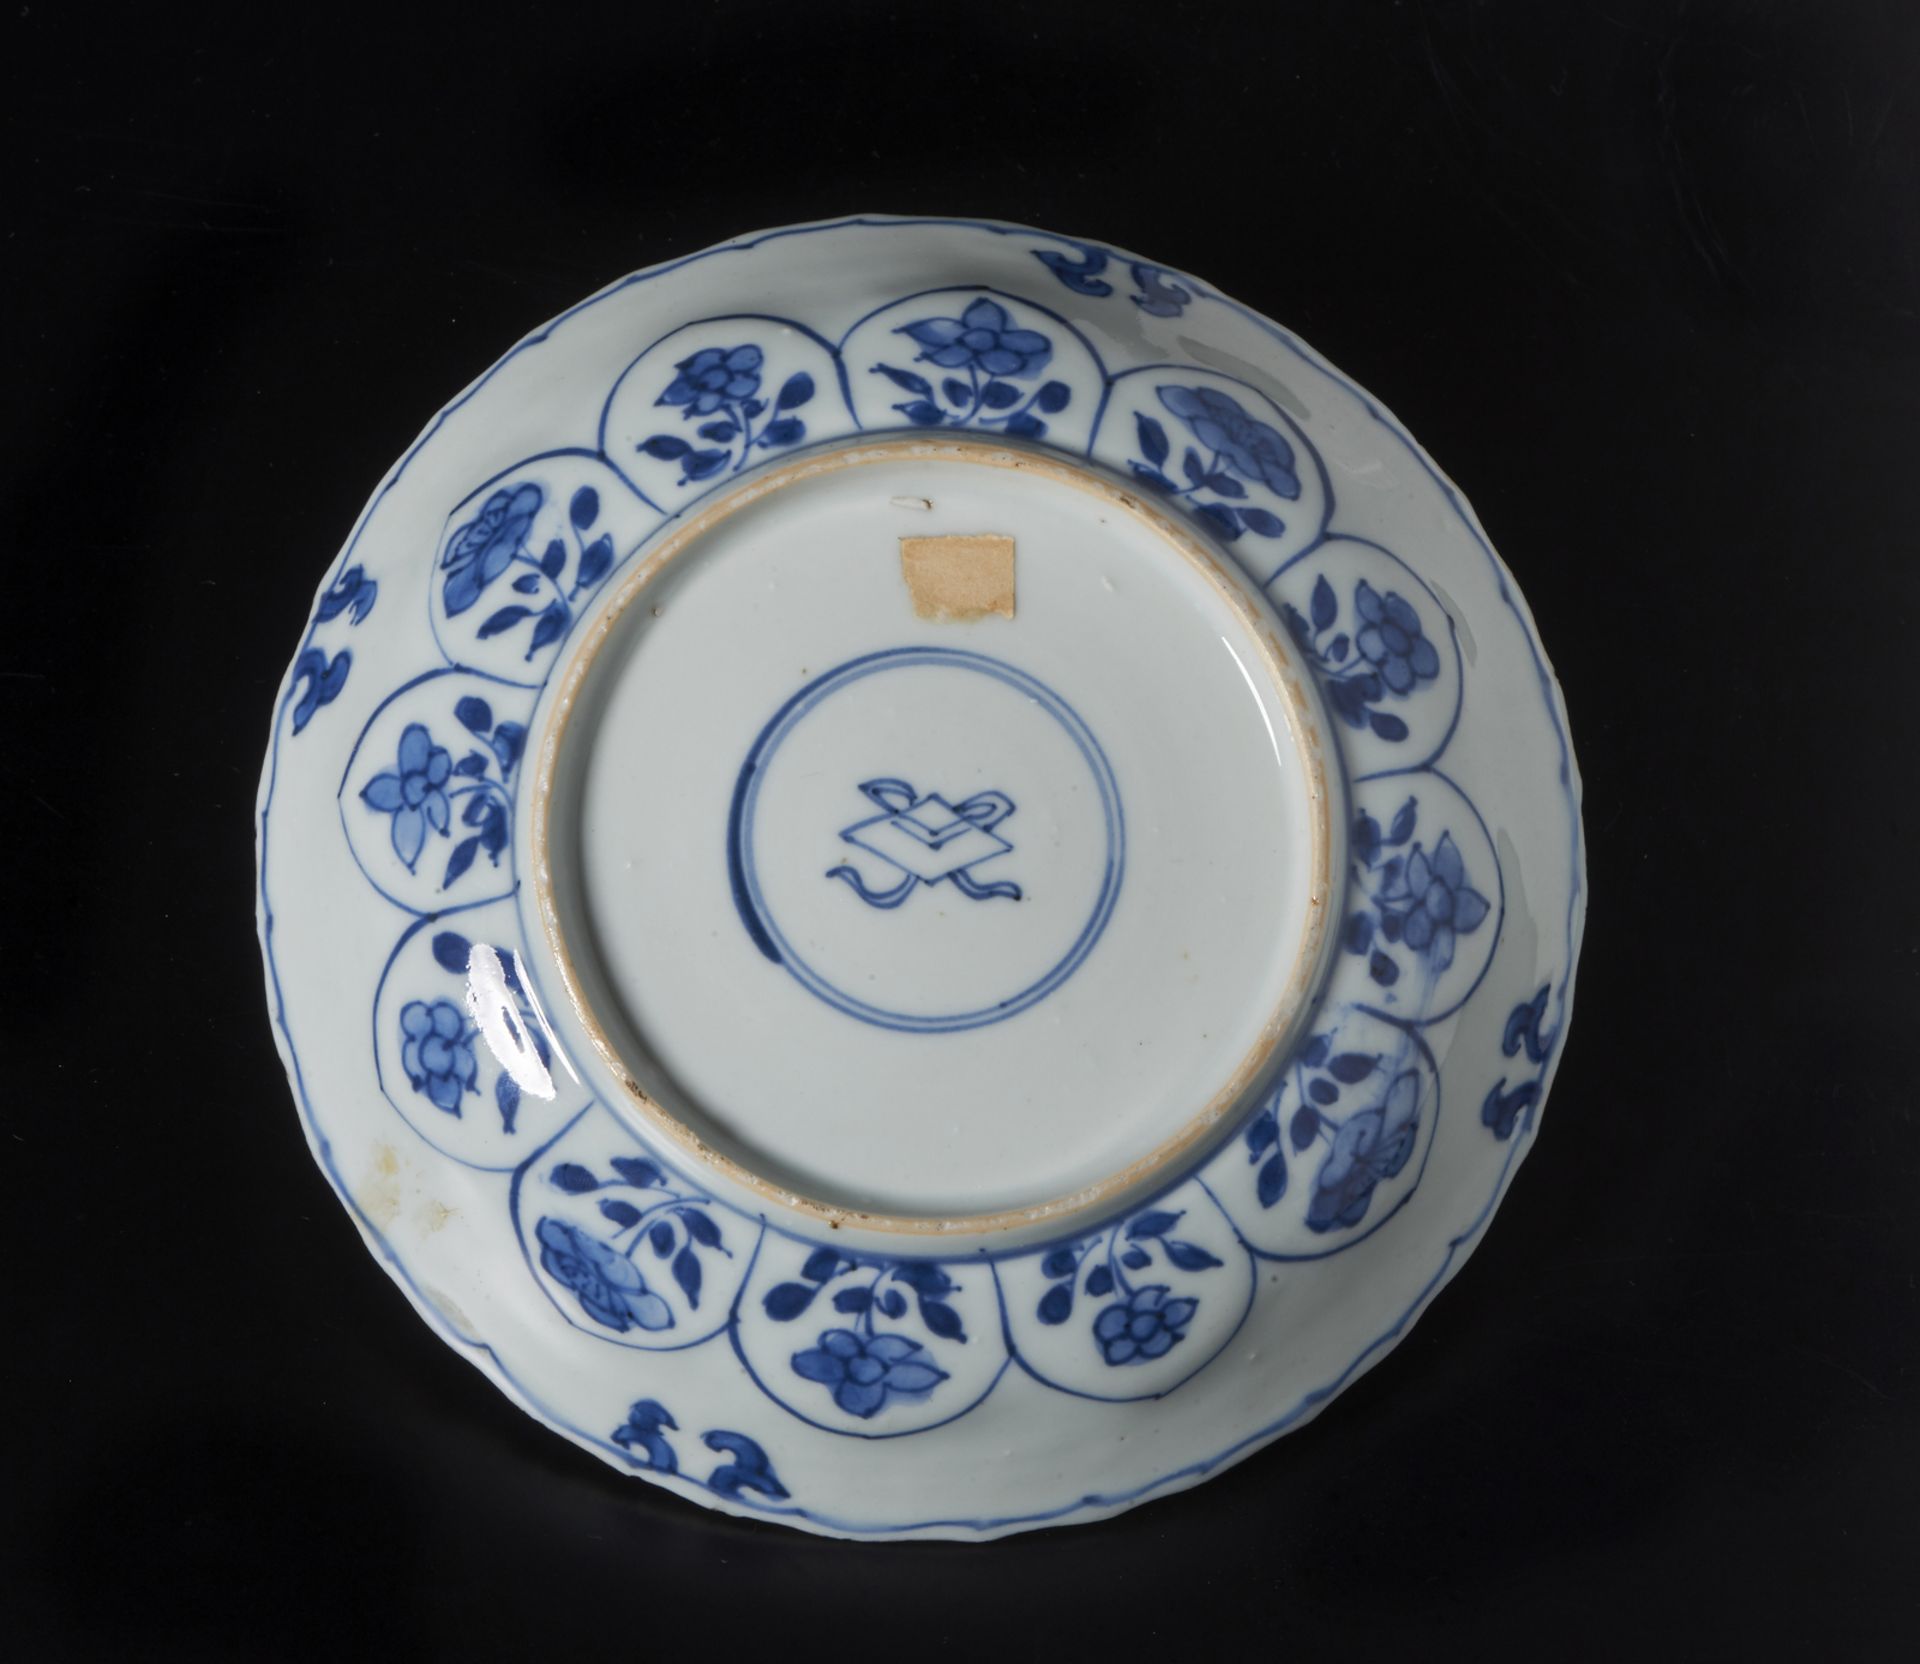 A blue and white porcelain dish China, Qing, Kangxi mark and perioddecorated with floral scrolls, - Image 3 of 3